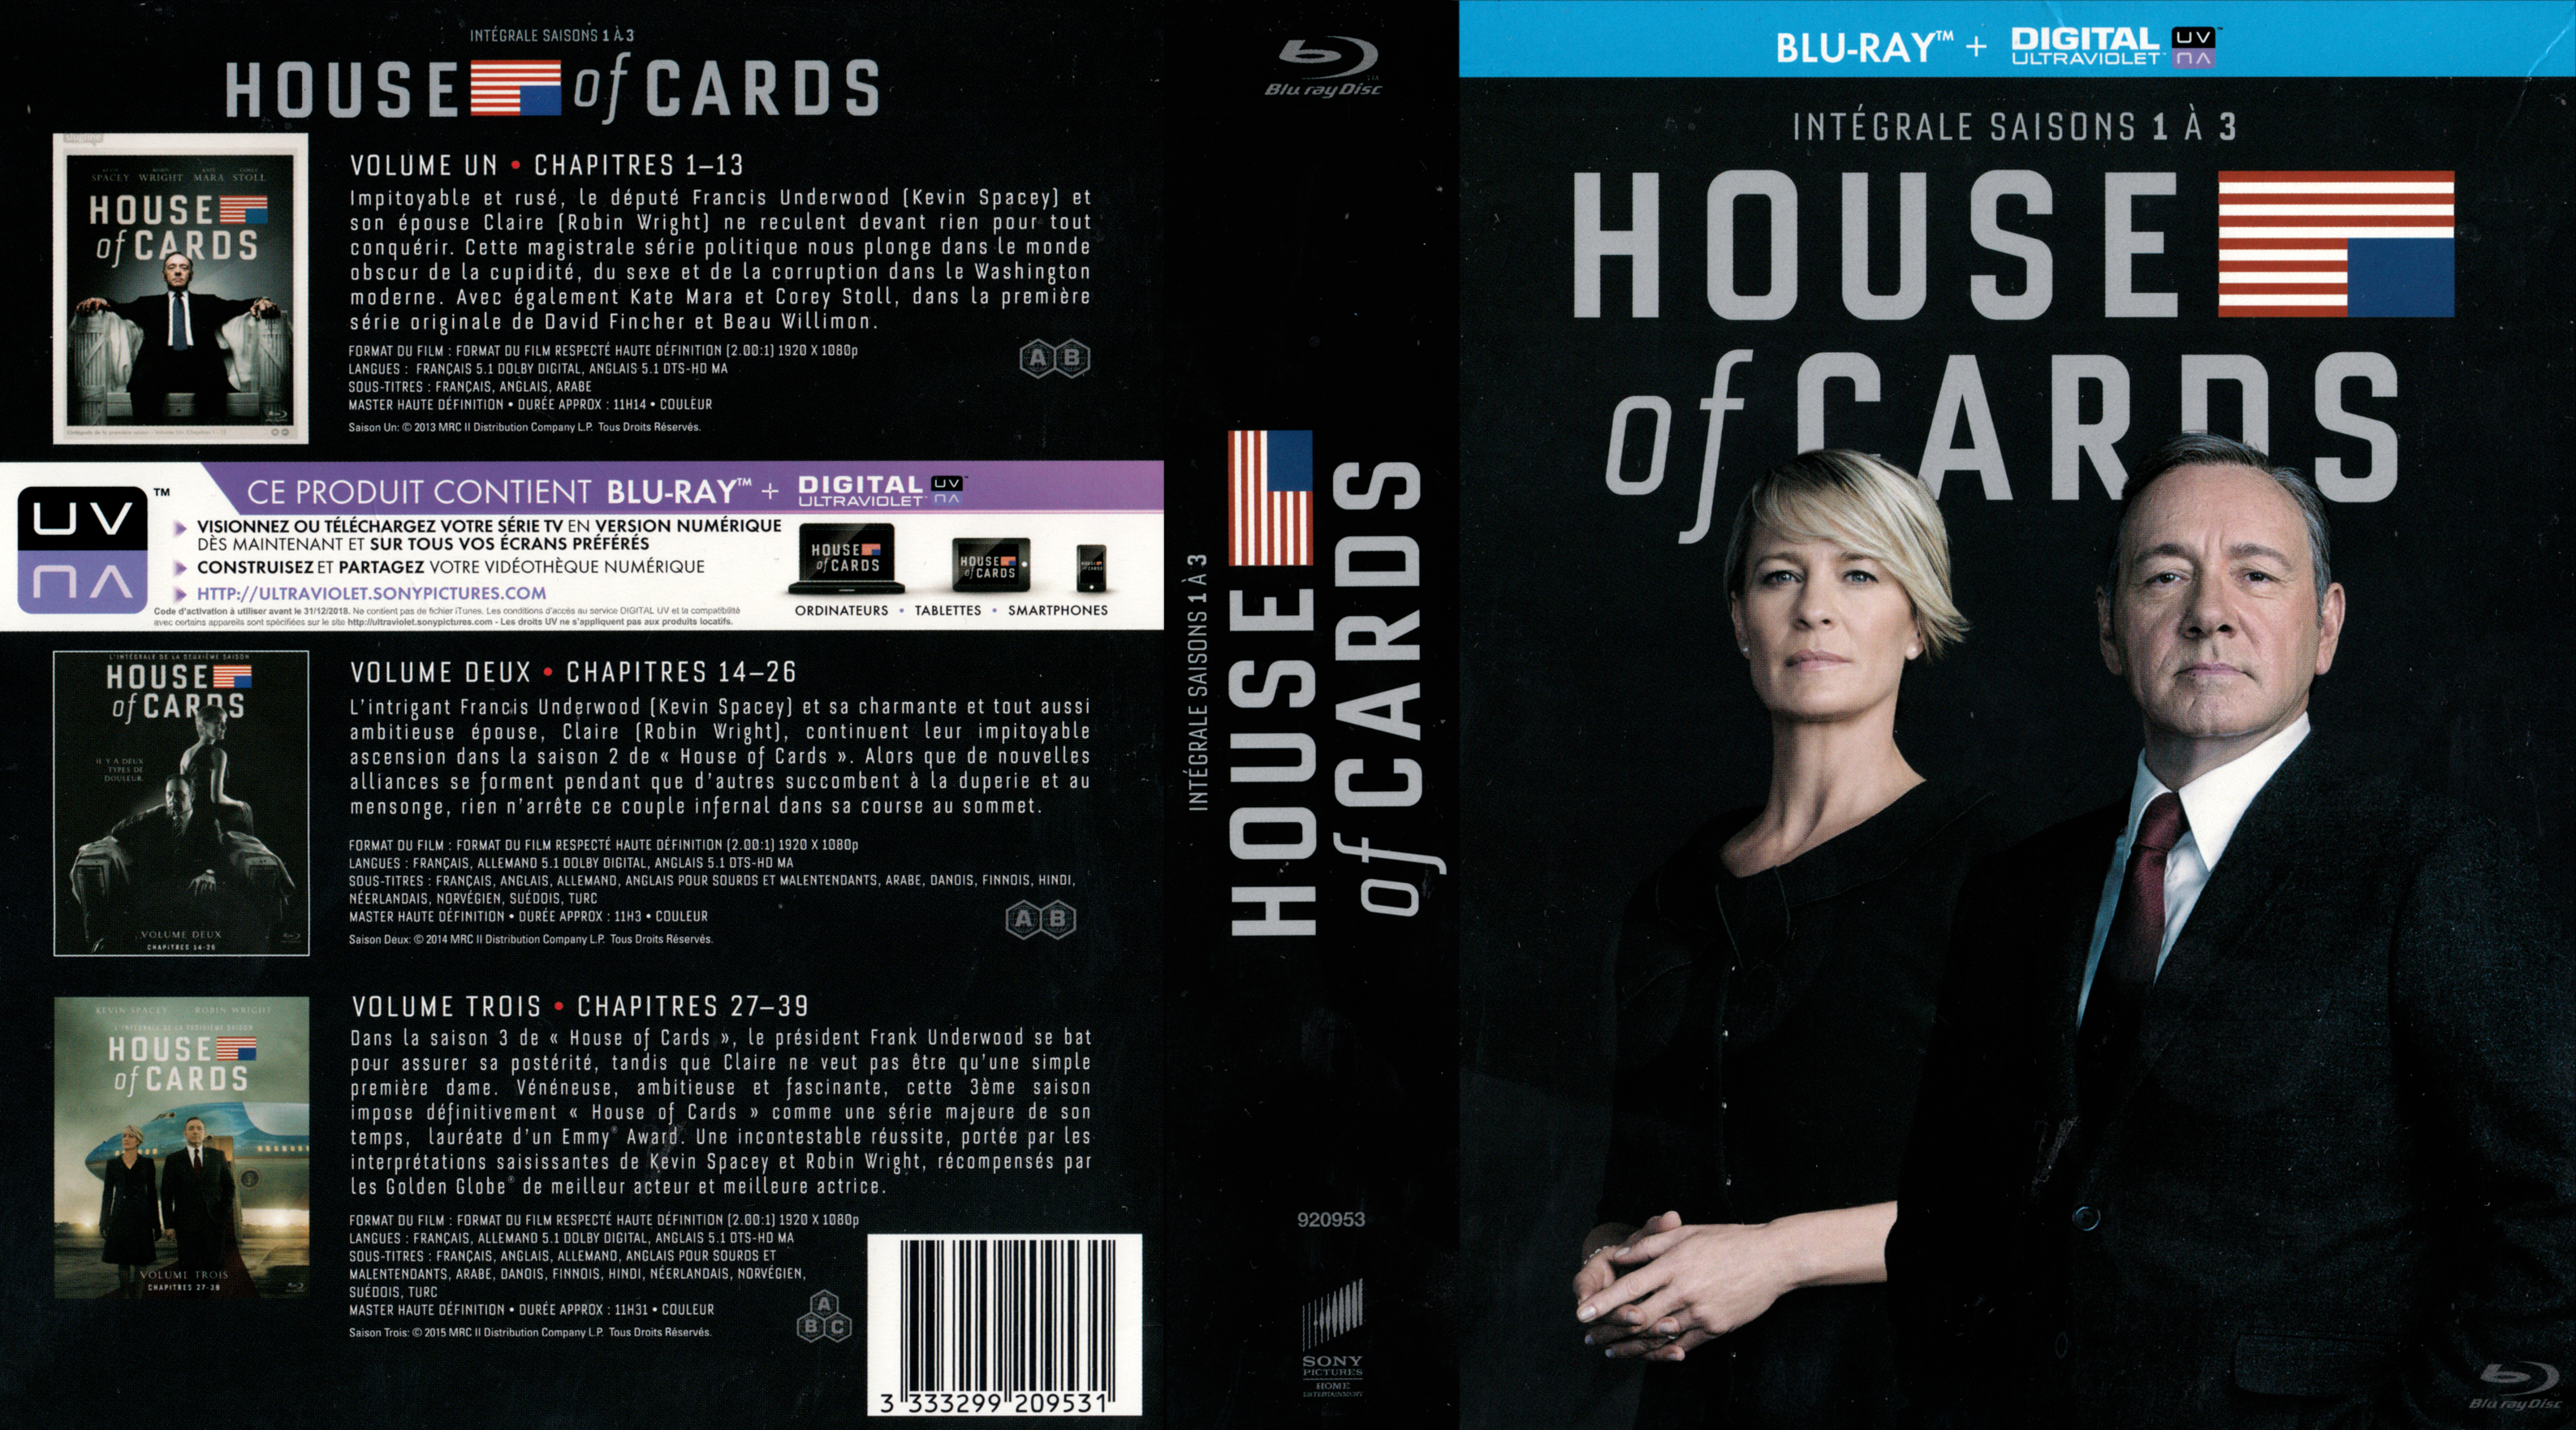 Jaquette DVD House of Cards Saison 1-3 (BLU-RAY)